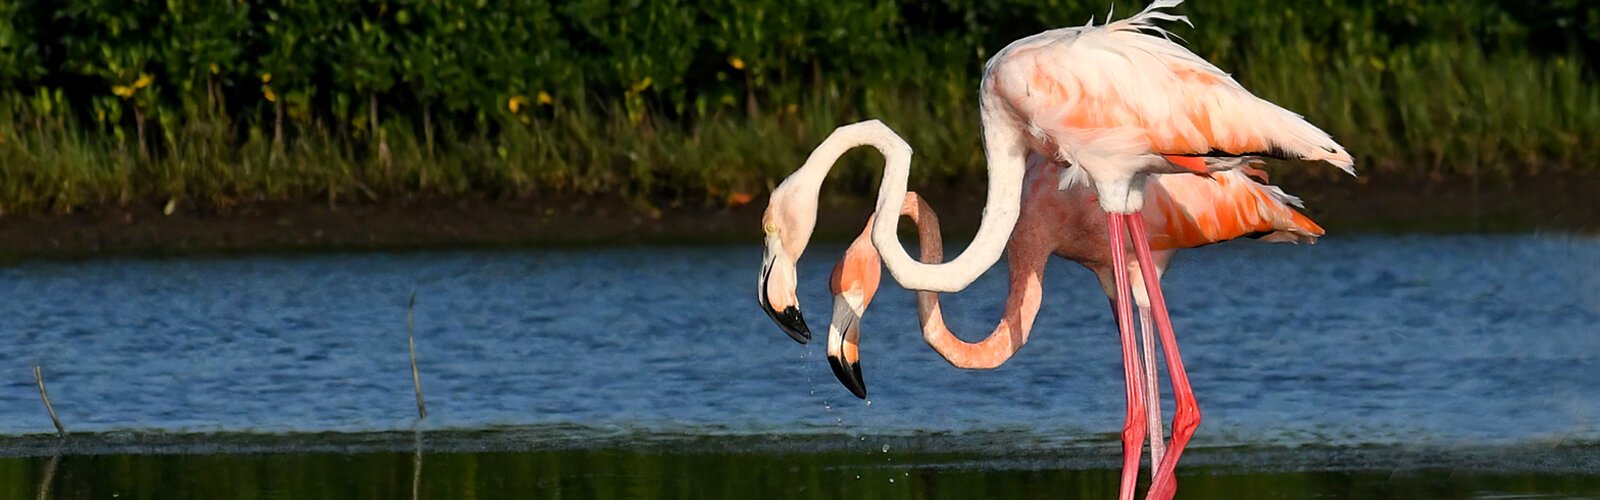 A synchronized display of parallel moves made with their long necks demonstrated that the two flamingos were indeed a bonded pair.